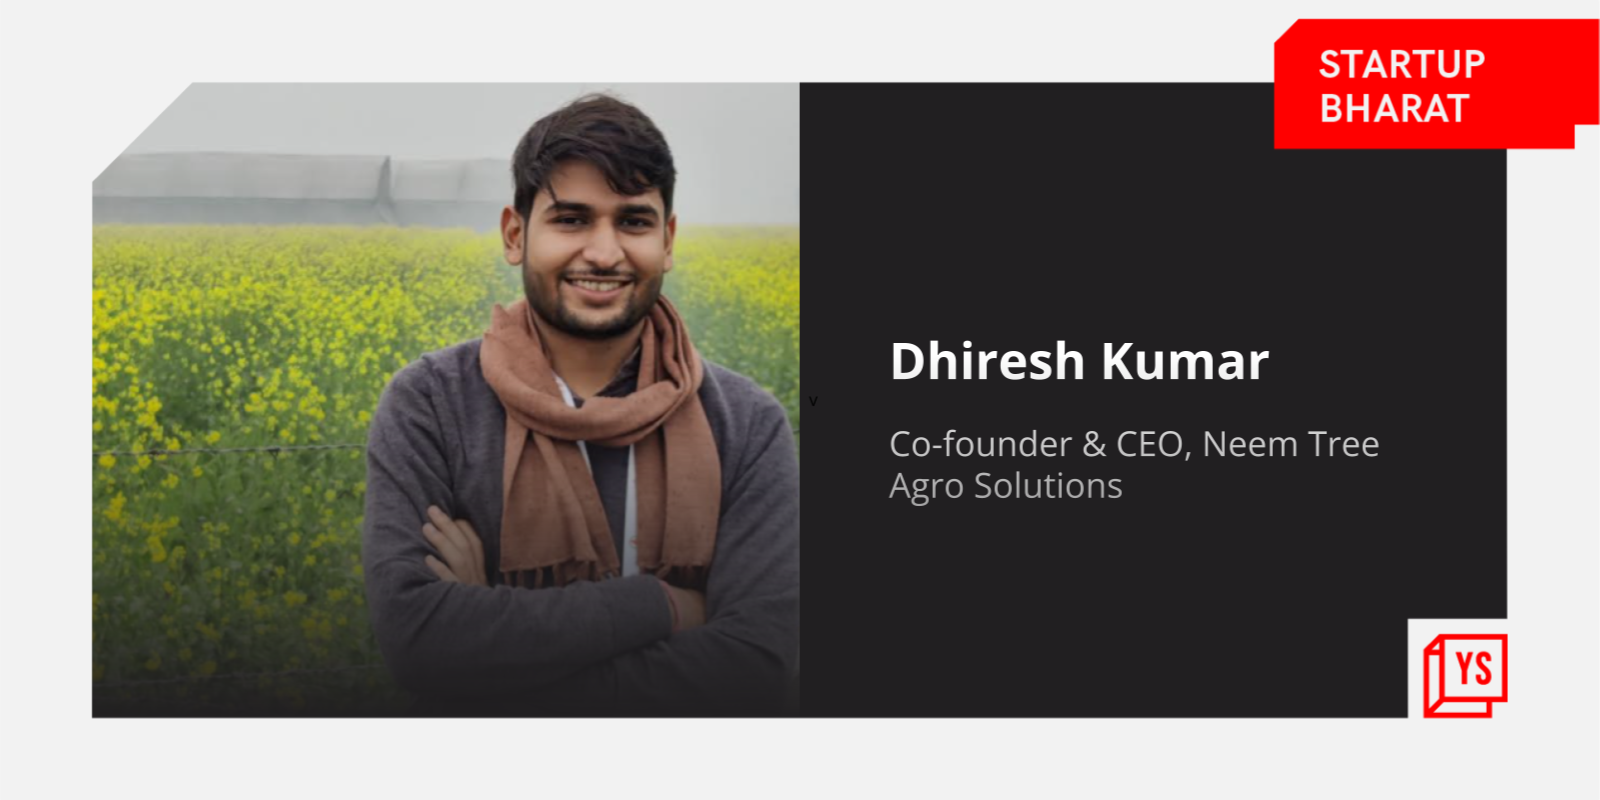 [Startup Bharat] This agritech startup aims to modernise farming with its full-stack solution